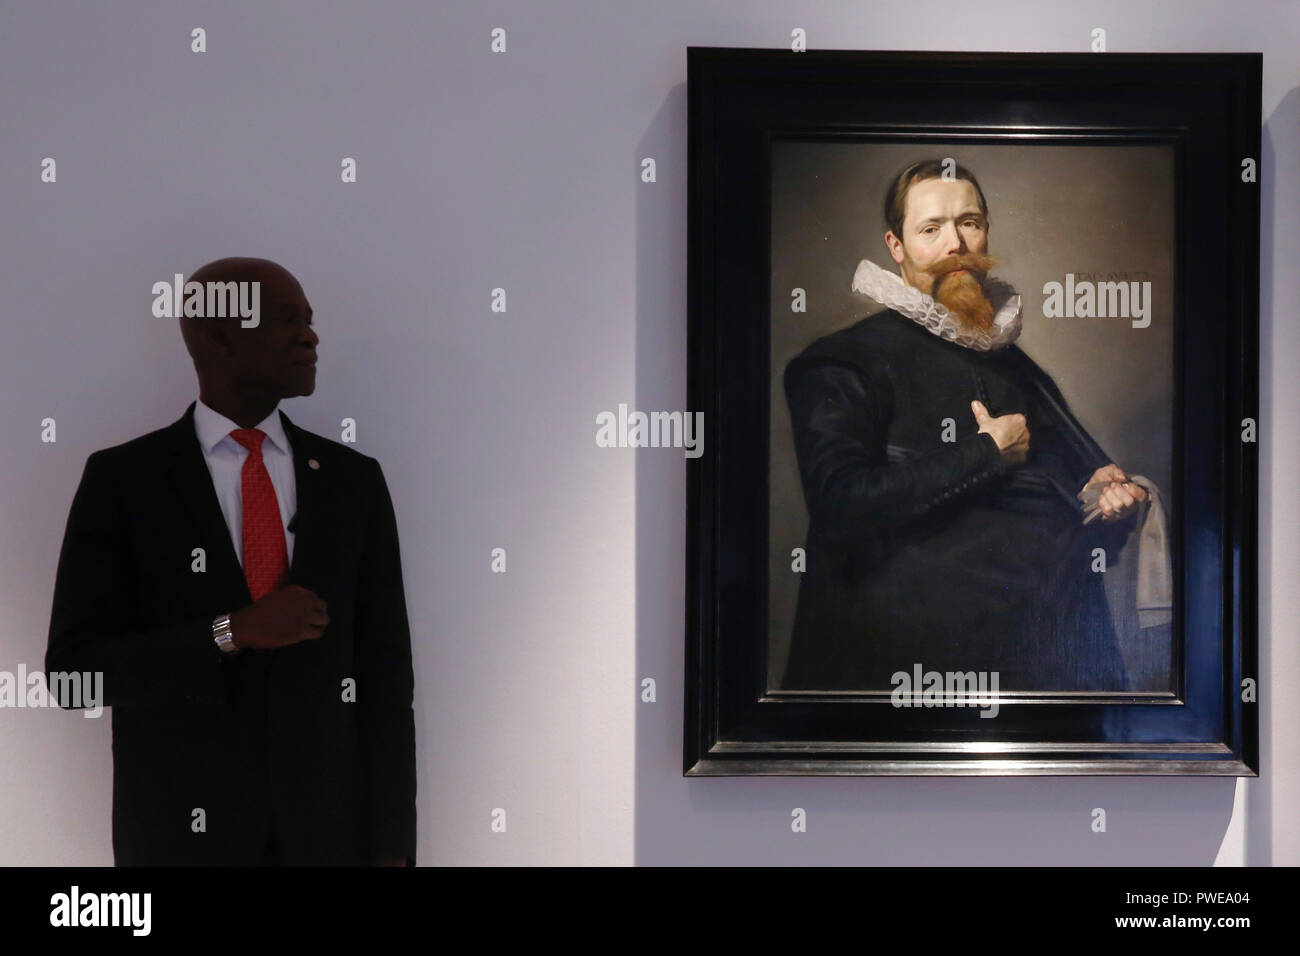 London, UK, 16th Oct 2018. A Christie's employee stands beside Dutch master Frans Hals 's works 'Portrait of a Gentleman holding a pair of gloves' at Christie's AuctionHouse in London, UK, Tuesday October 16, 2017. The pair is expected to achieve up to £12million when they come to auction as part of the Albada Jelgersma Collection sale during Christie's Classic Week in December. Photograph : Credit: Luke MacGregor/Alamy Live News Stock Photo